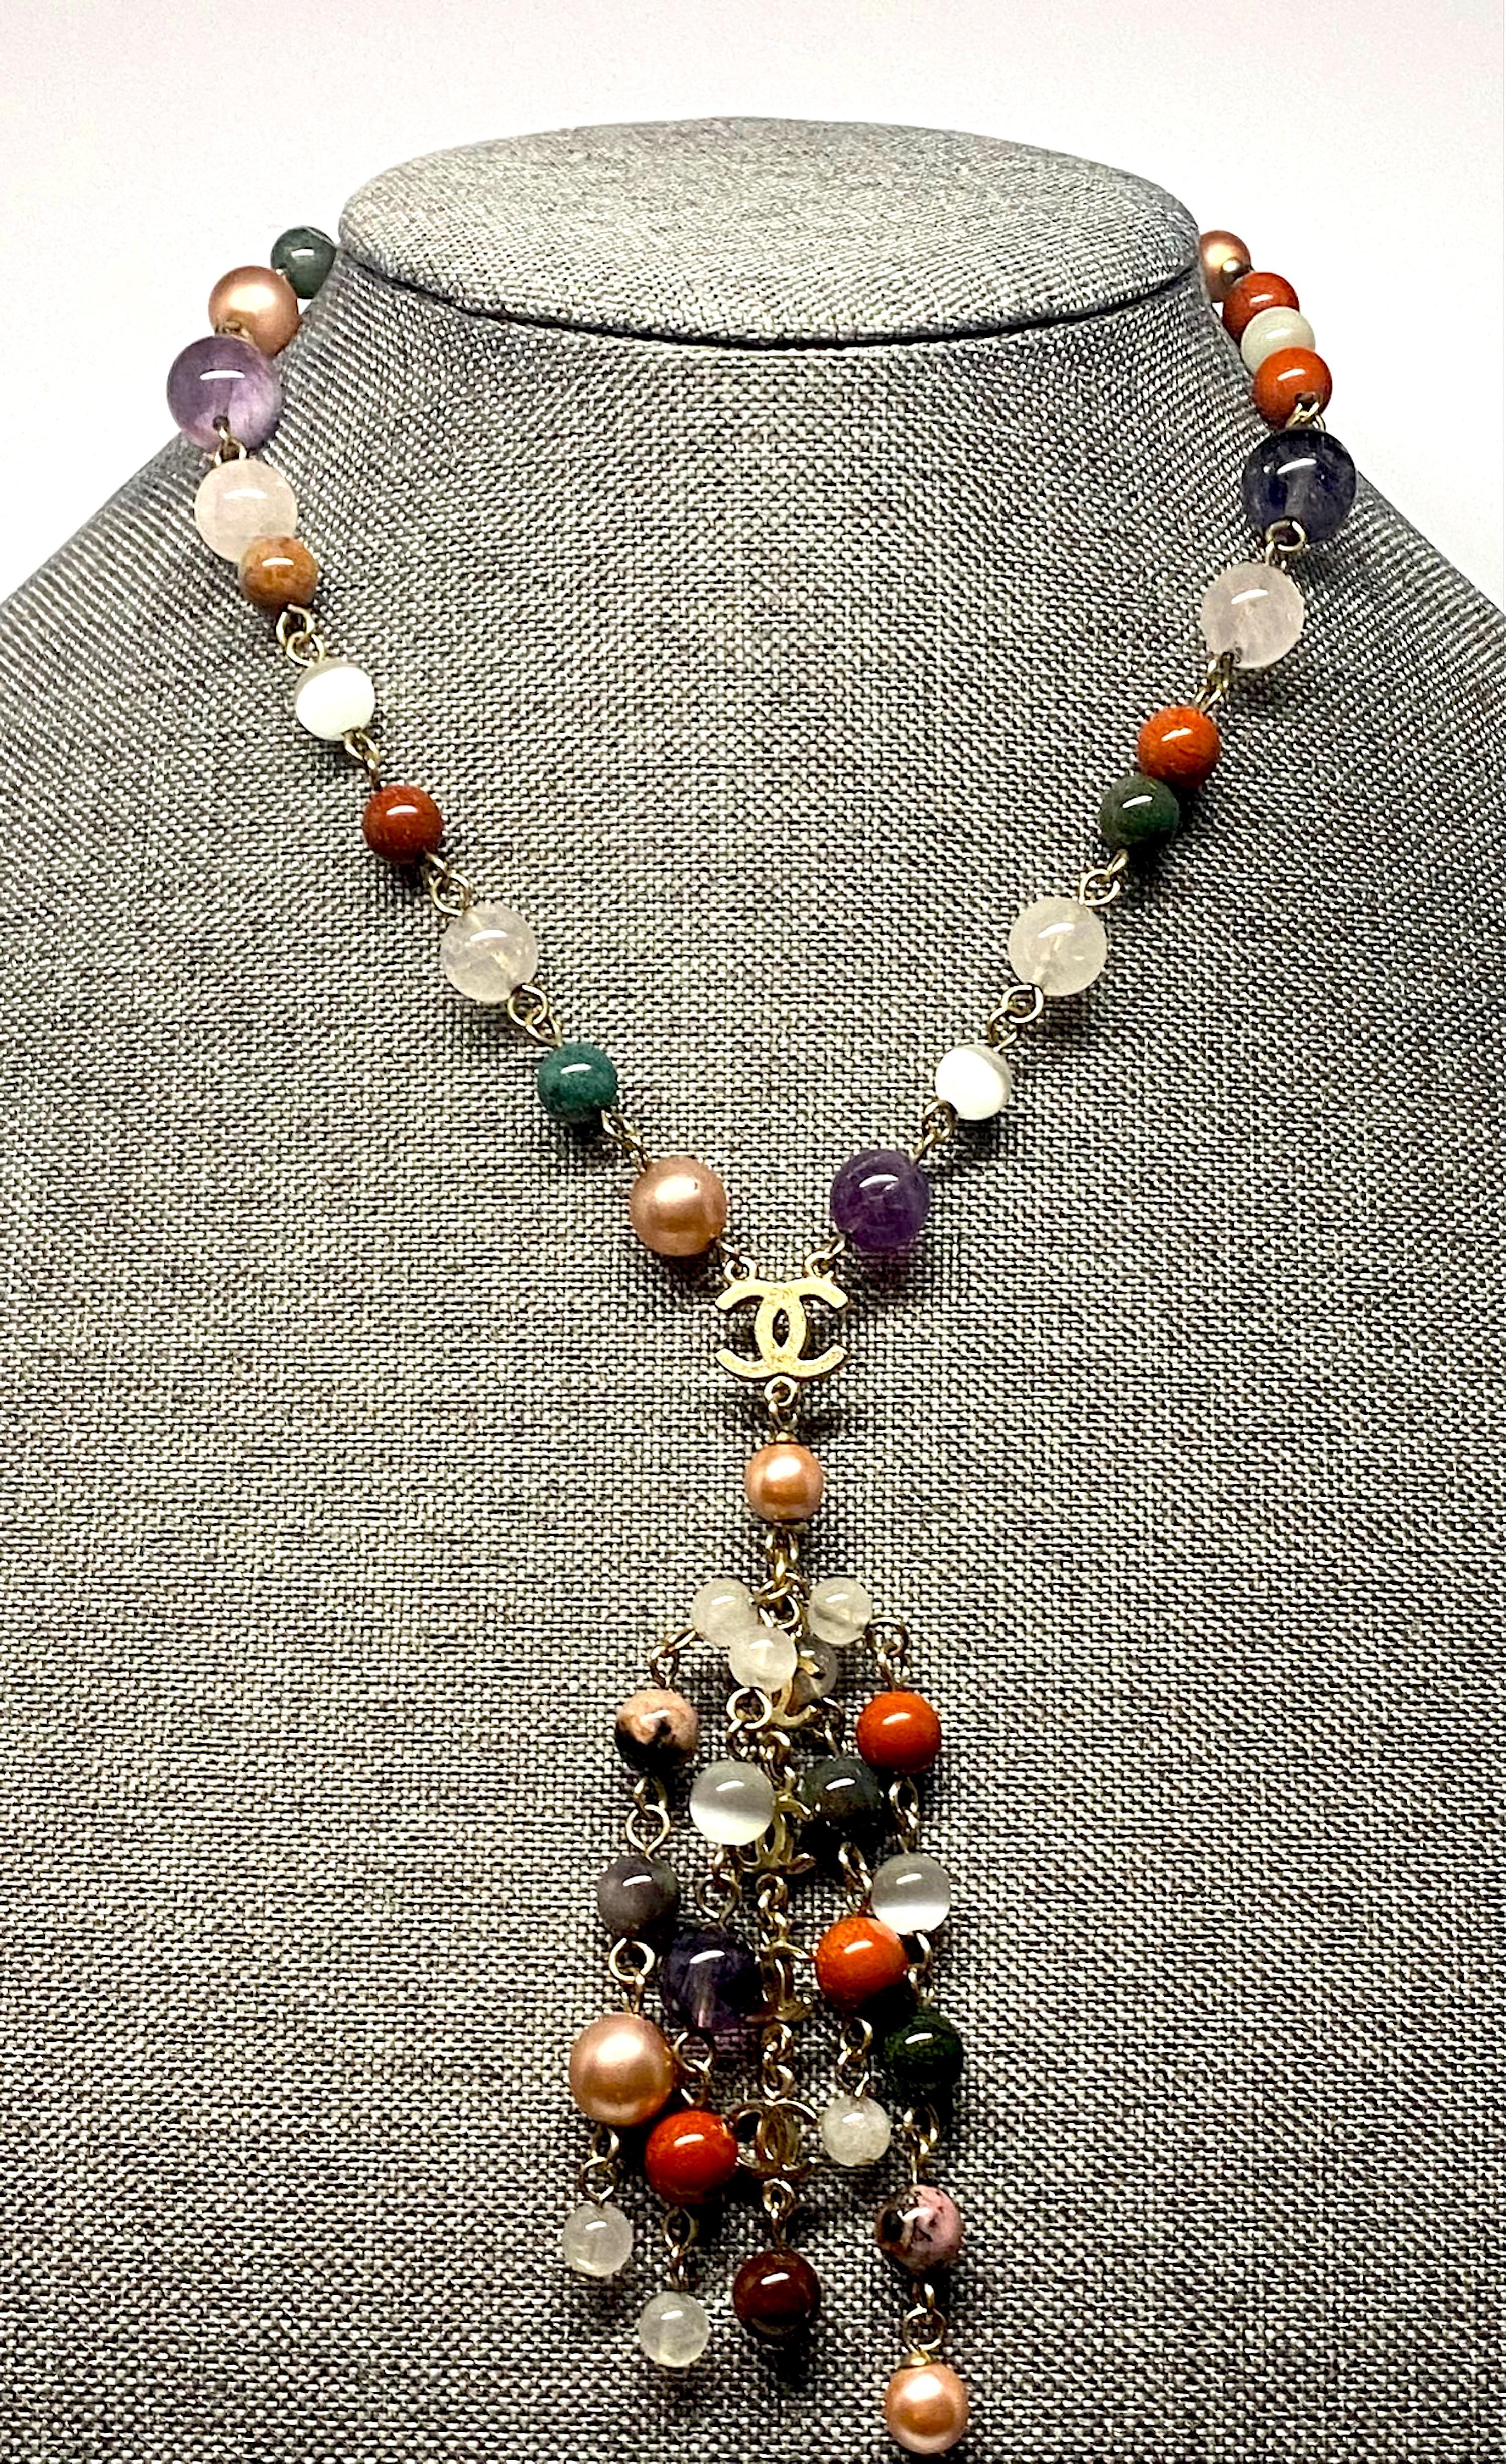 A lovely and easy to wear Chanel bead necklace from the 2007 cruise collection. The necklace is 17.25 inches long of semi precious stone beads connected by satin gold color rings. The various size beads are transparent pale rose quartz, terra cotta